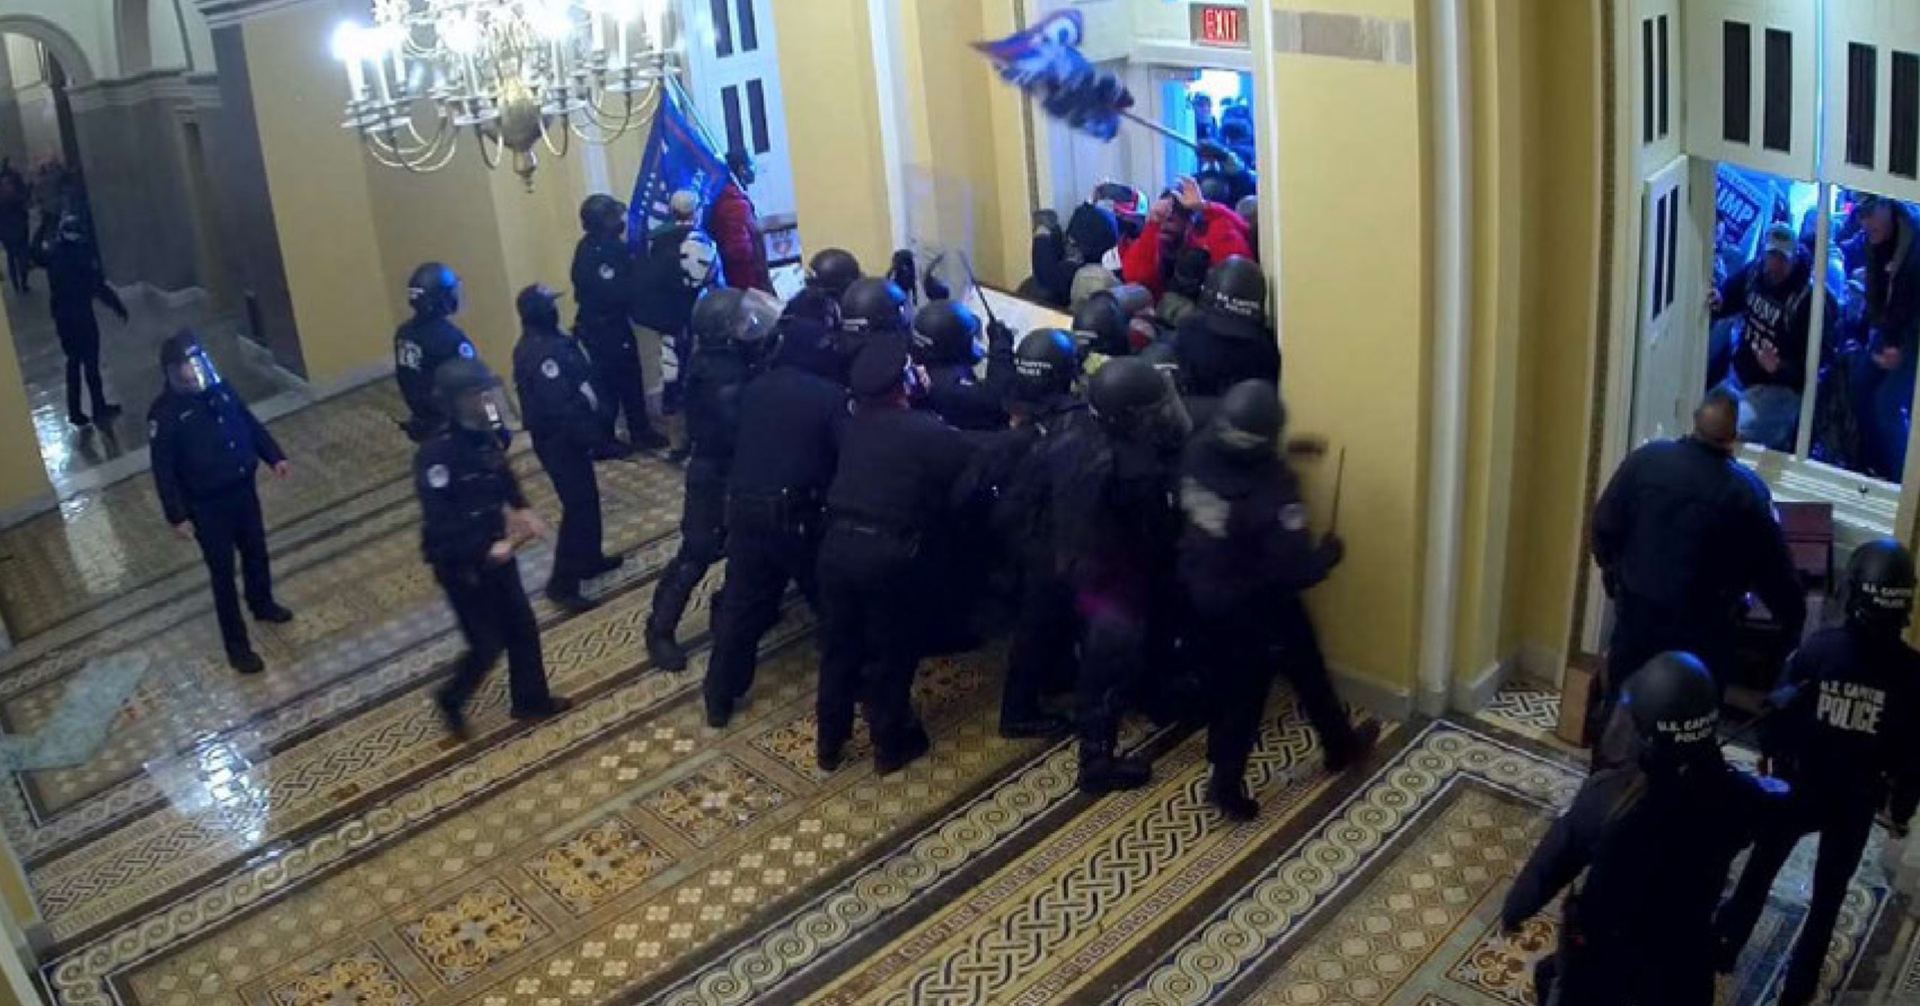 An overhead image shows a group of police wearing helmets and other protective gear, with some carrying batons, standing in a cluster at the entrance to a doorway and facing a crowd of people, some of whom are carrying flags, in a room with a tile floor and illuminated chandelier, with other officers standing in front of windows windows with no glass in the frames on one side of the entry.